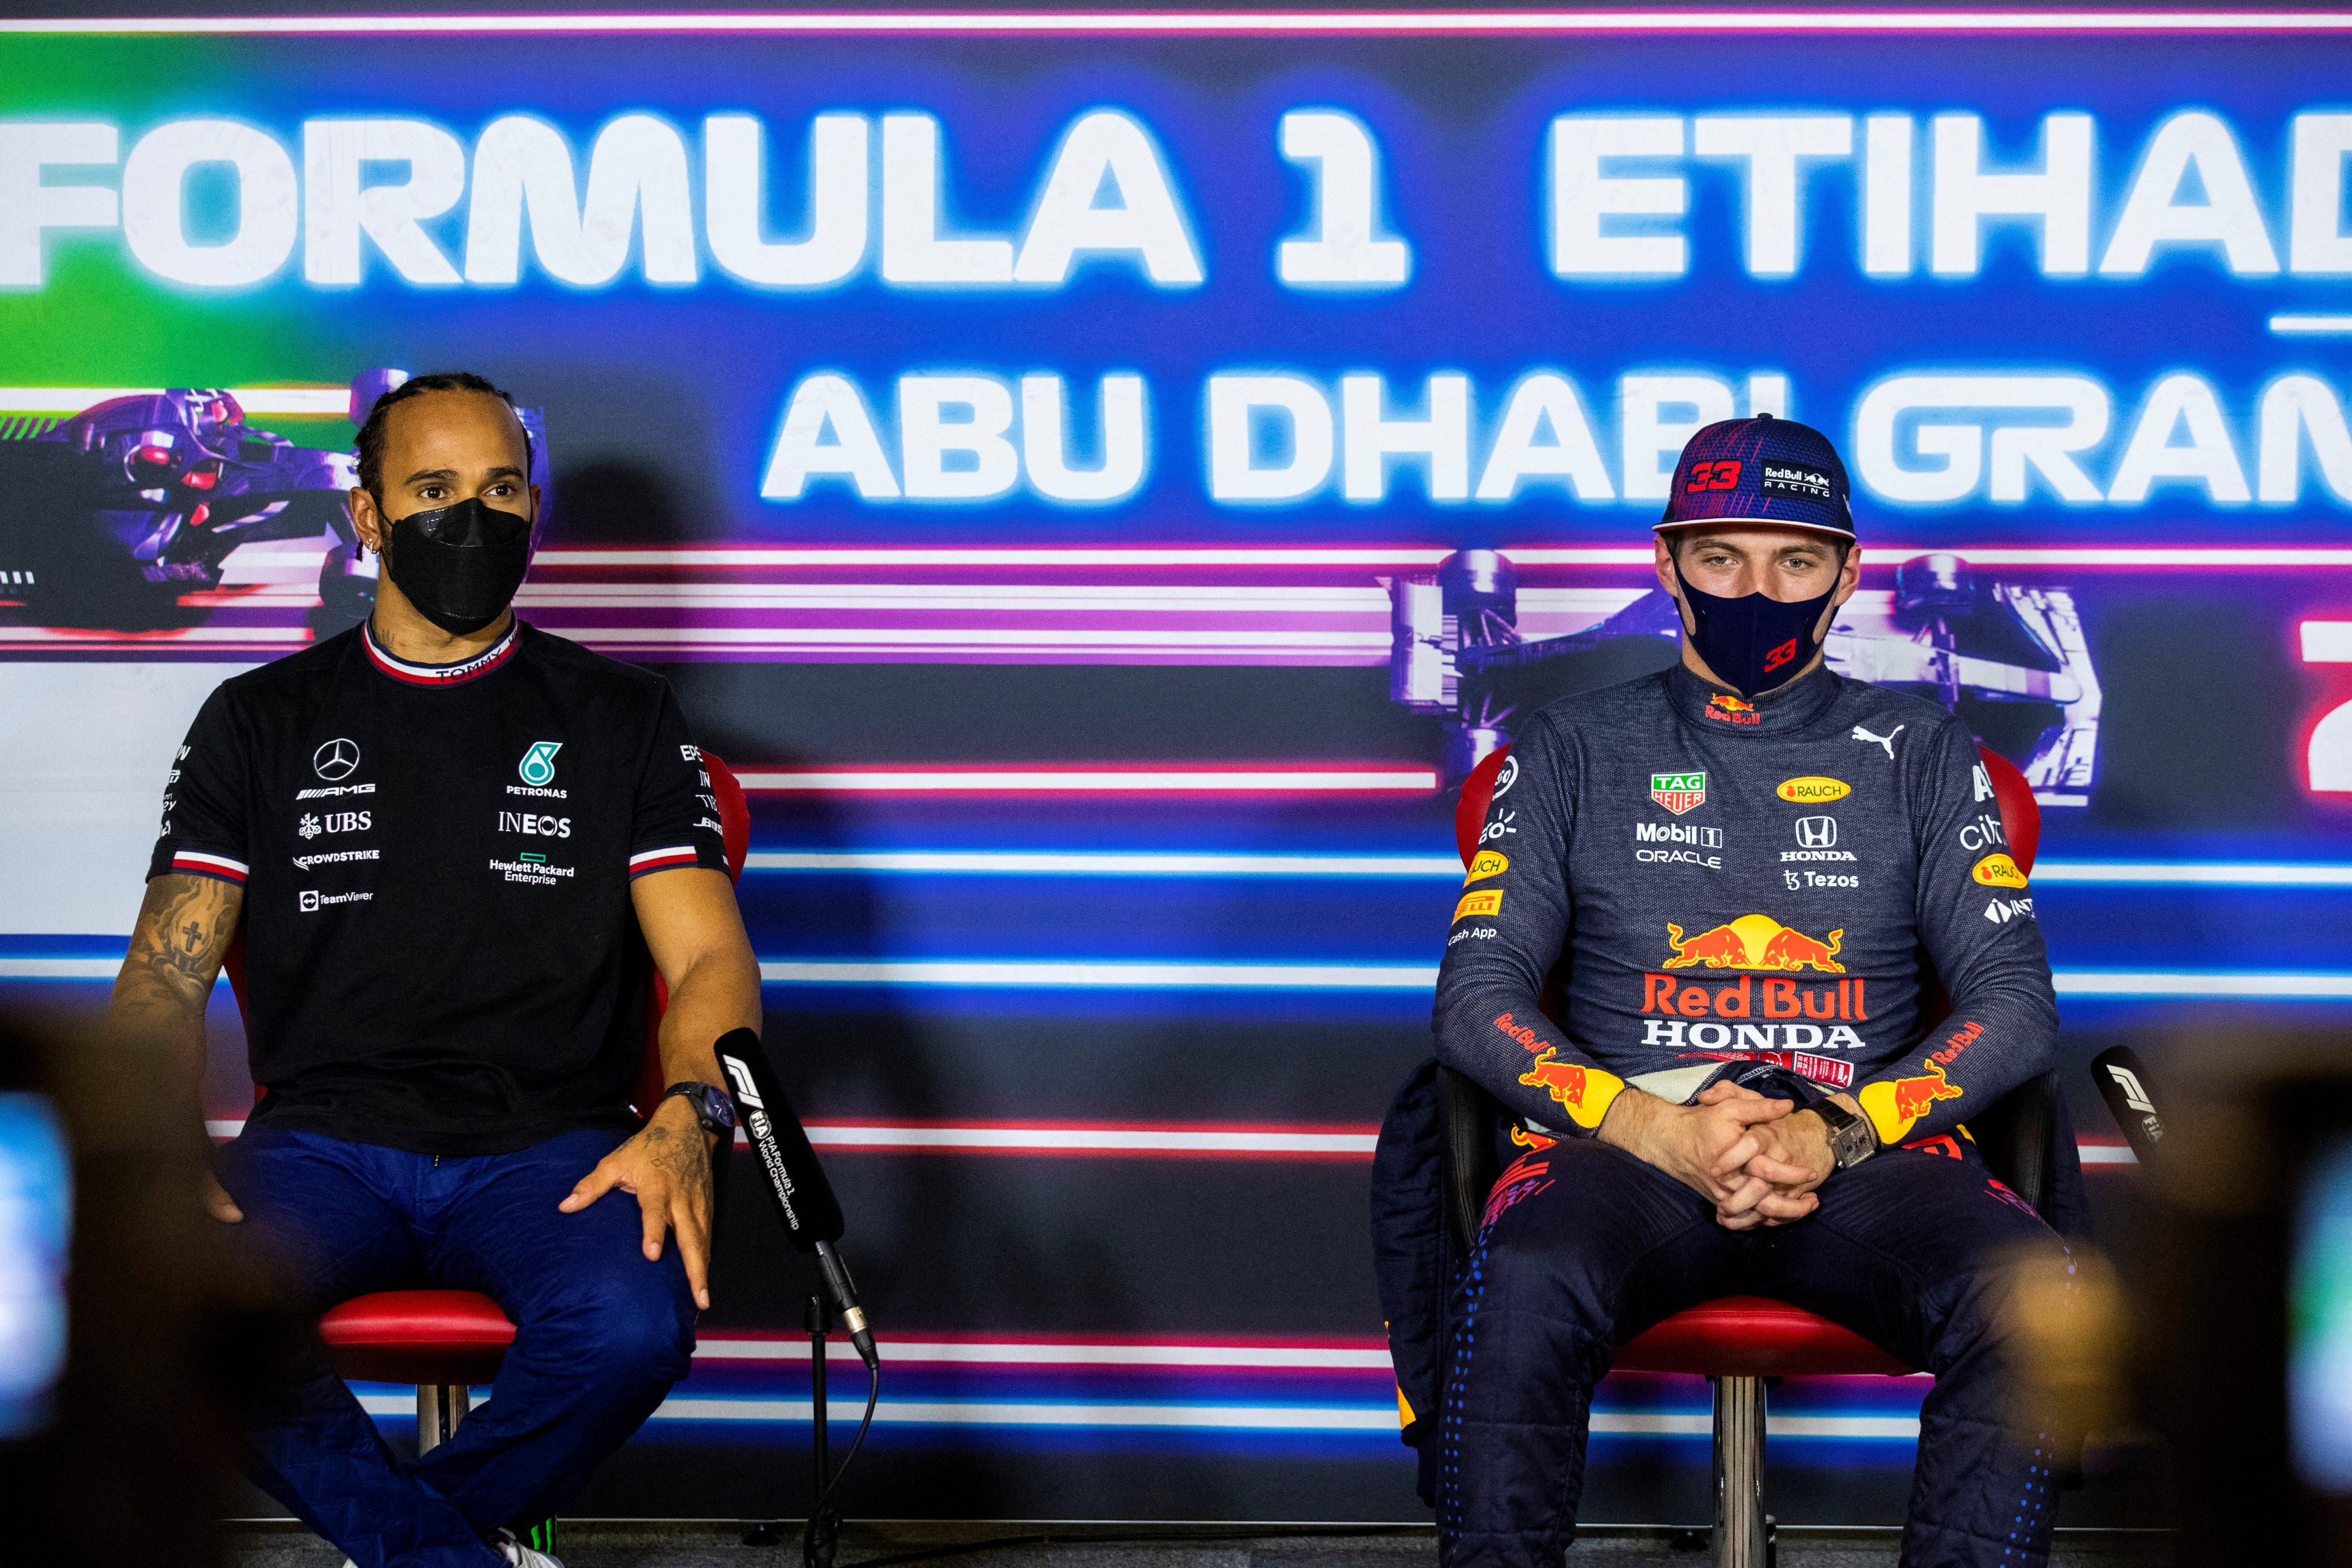 Lewis Hamilton and Max Verstappen discuss the weekend’s race at a press conference in Abu Dhabi. Photo: Reuters